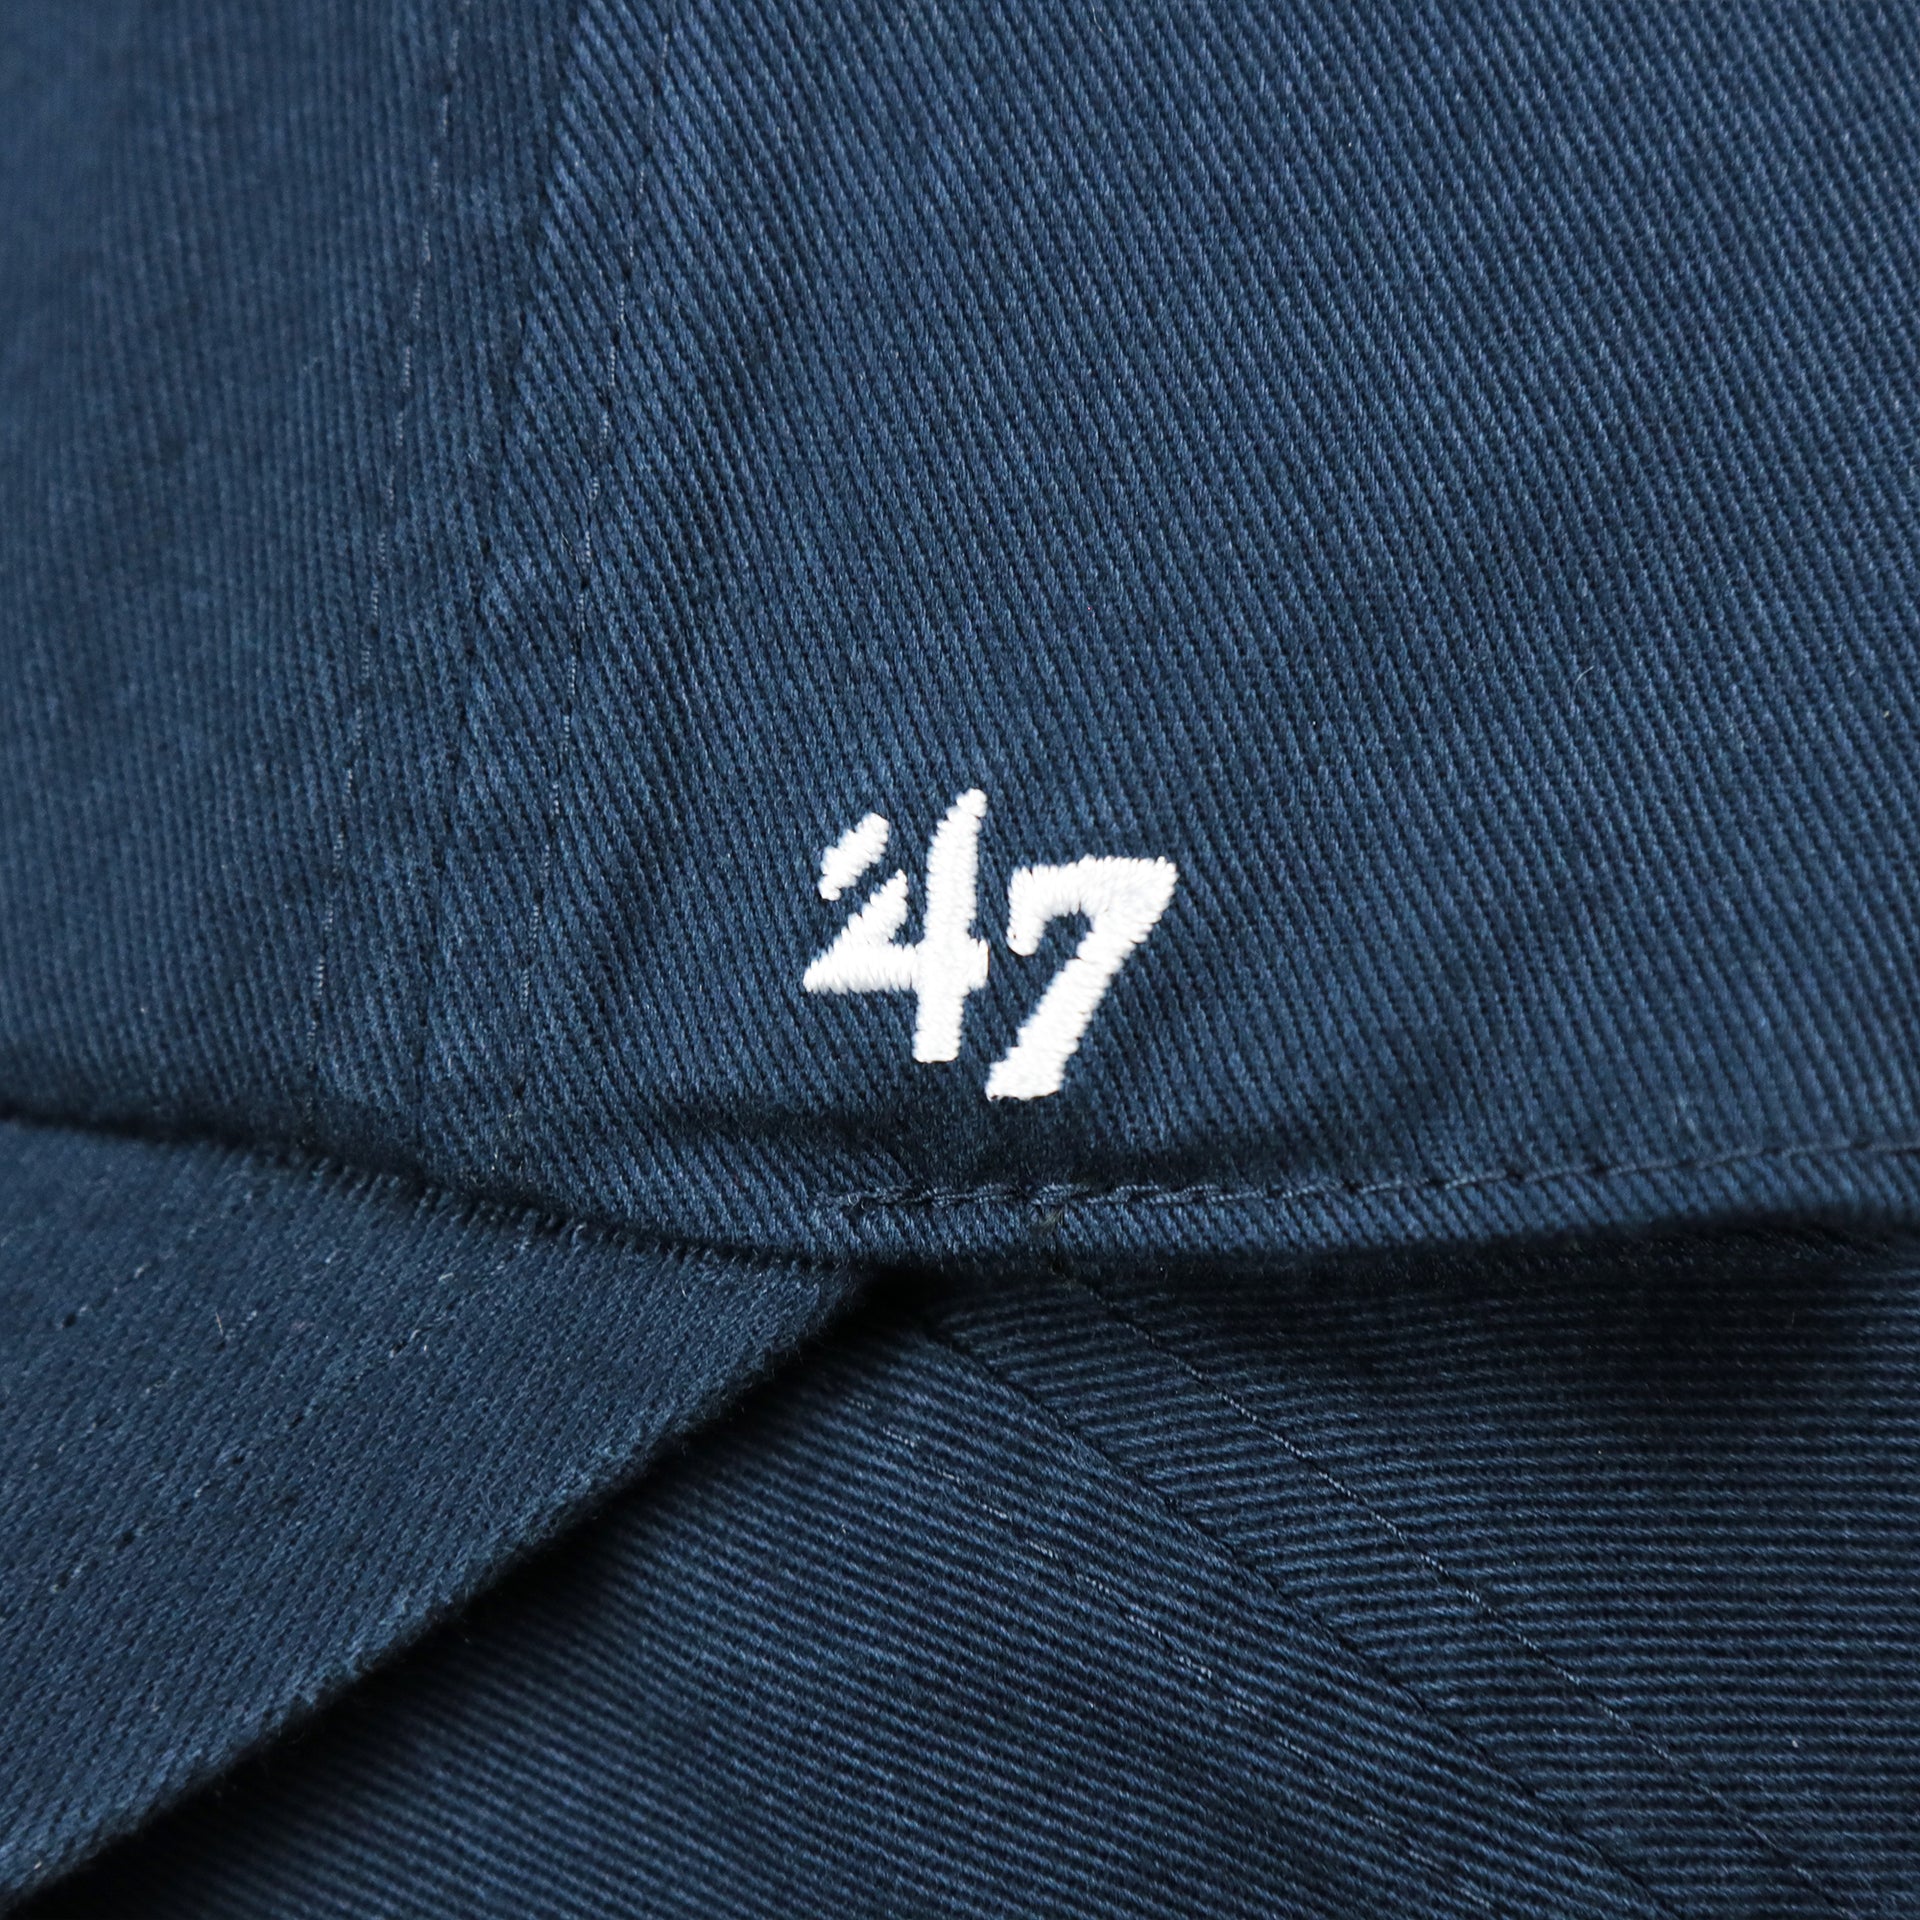 The 47 Brand logo on the Cooperstown New York Yankees Retro Yankees Logo Dad Hat | Navy Dad Hat